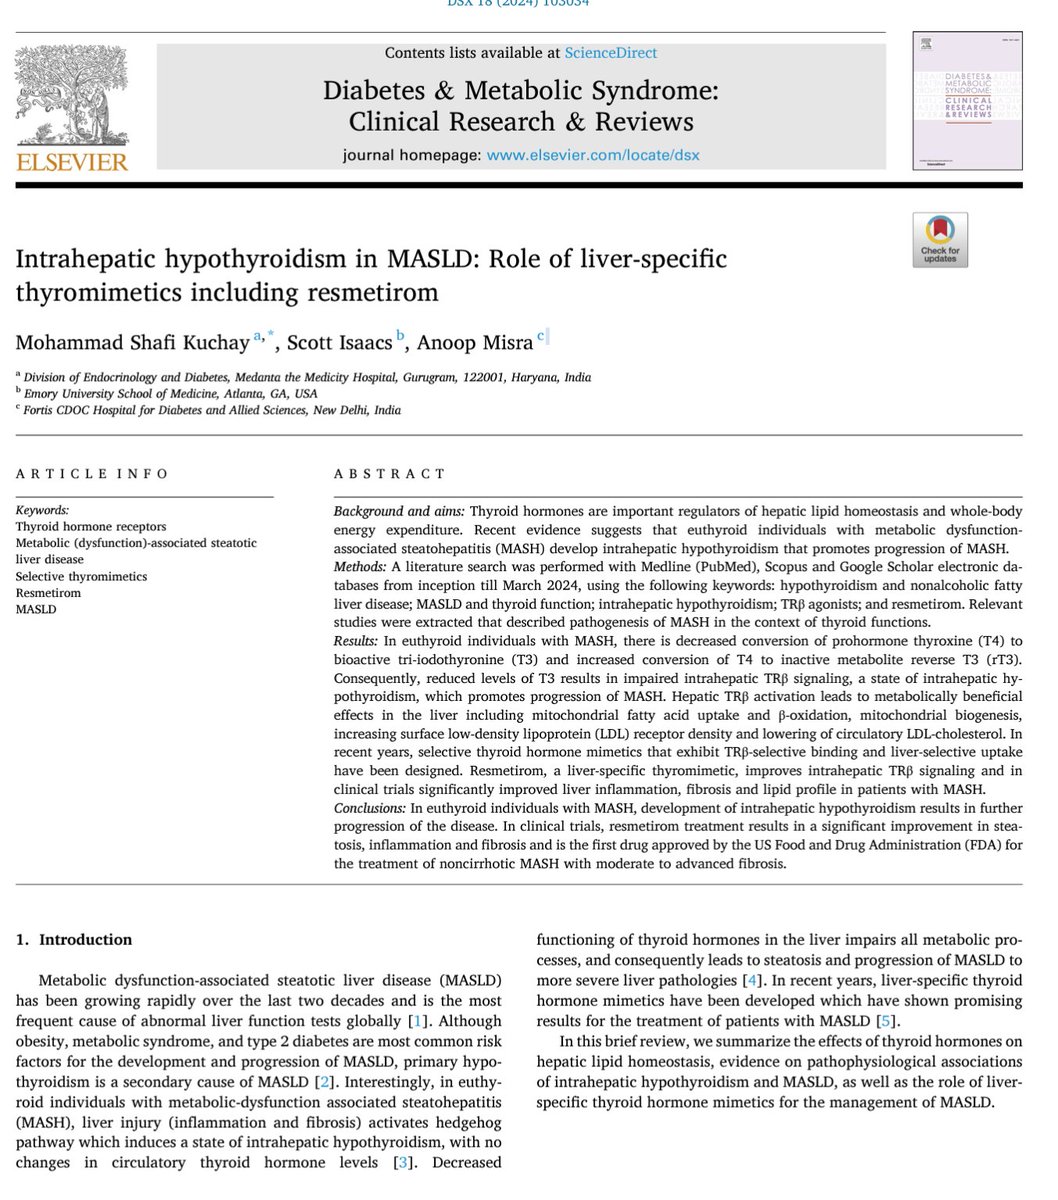 Our article on intrahepatic hypothyroidism in #MASLD. The role of liver-specific thyromimetics including #resmetirom. International collaboration with @drshafikuchay in Haryana, Rajasthan and @docanoopmisra in New Delhi. #MASH #livertwitter @MadrigalPharma